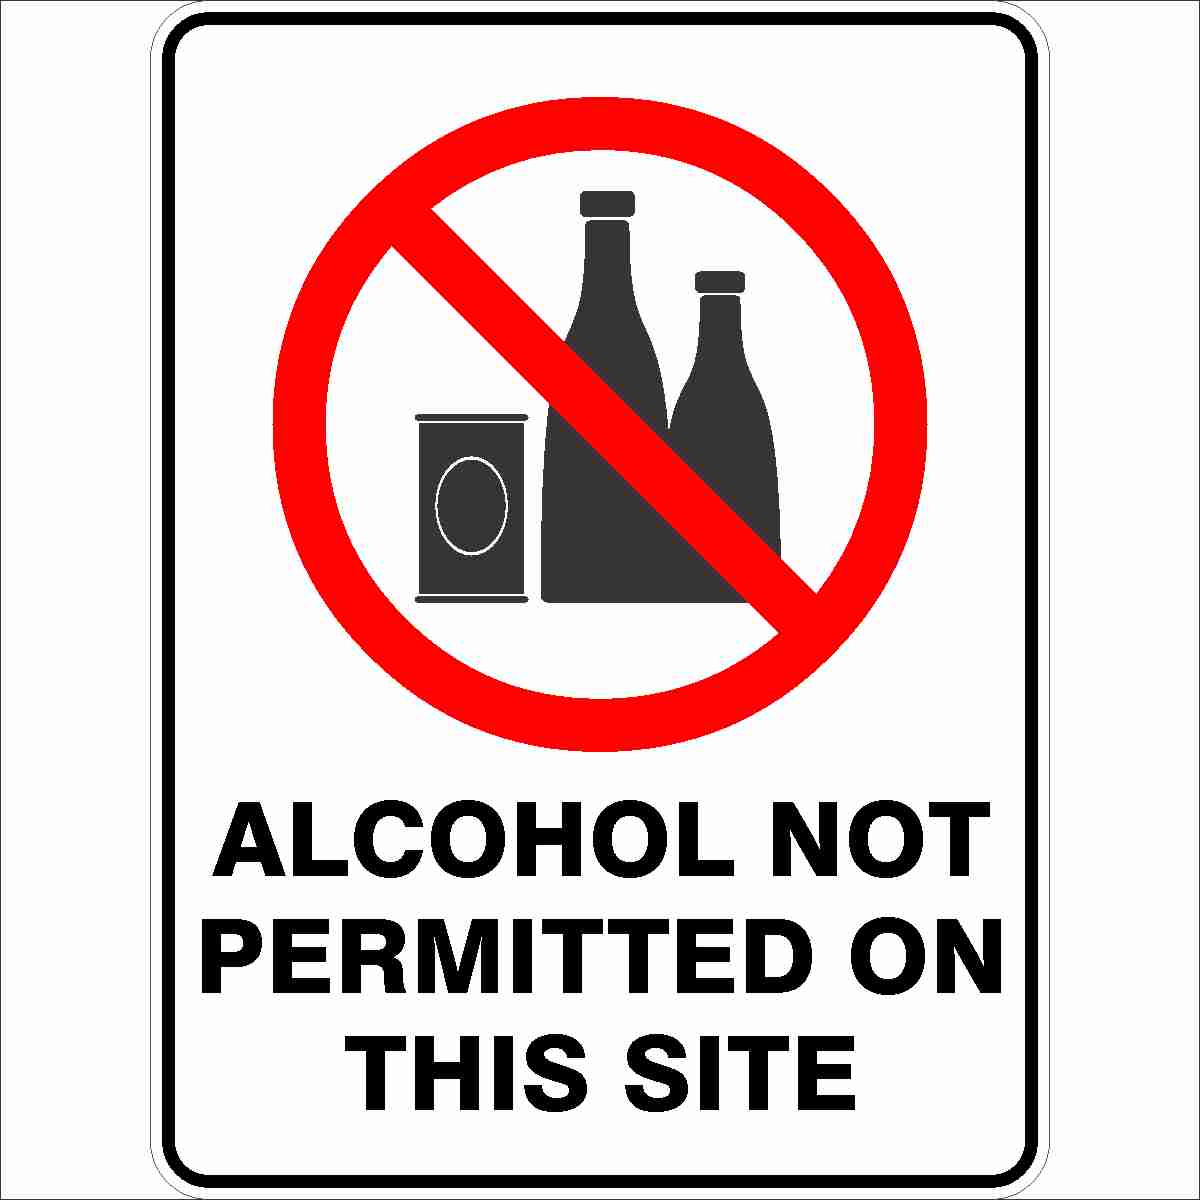 The product is not permitted. Алкоголь. Но алкоголь. Ноу алкоголь. Do not Drink alcohol.